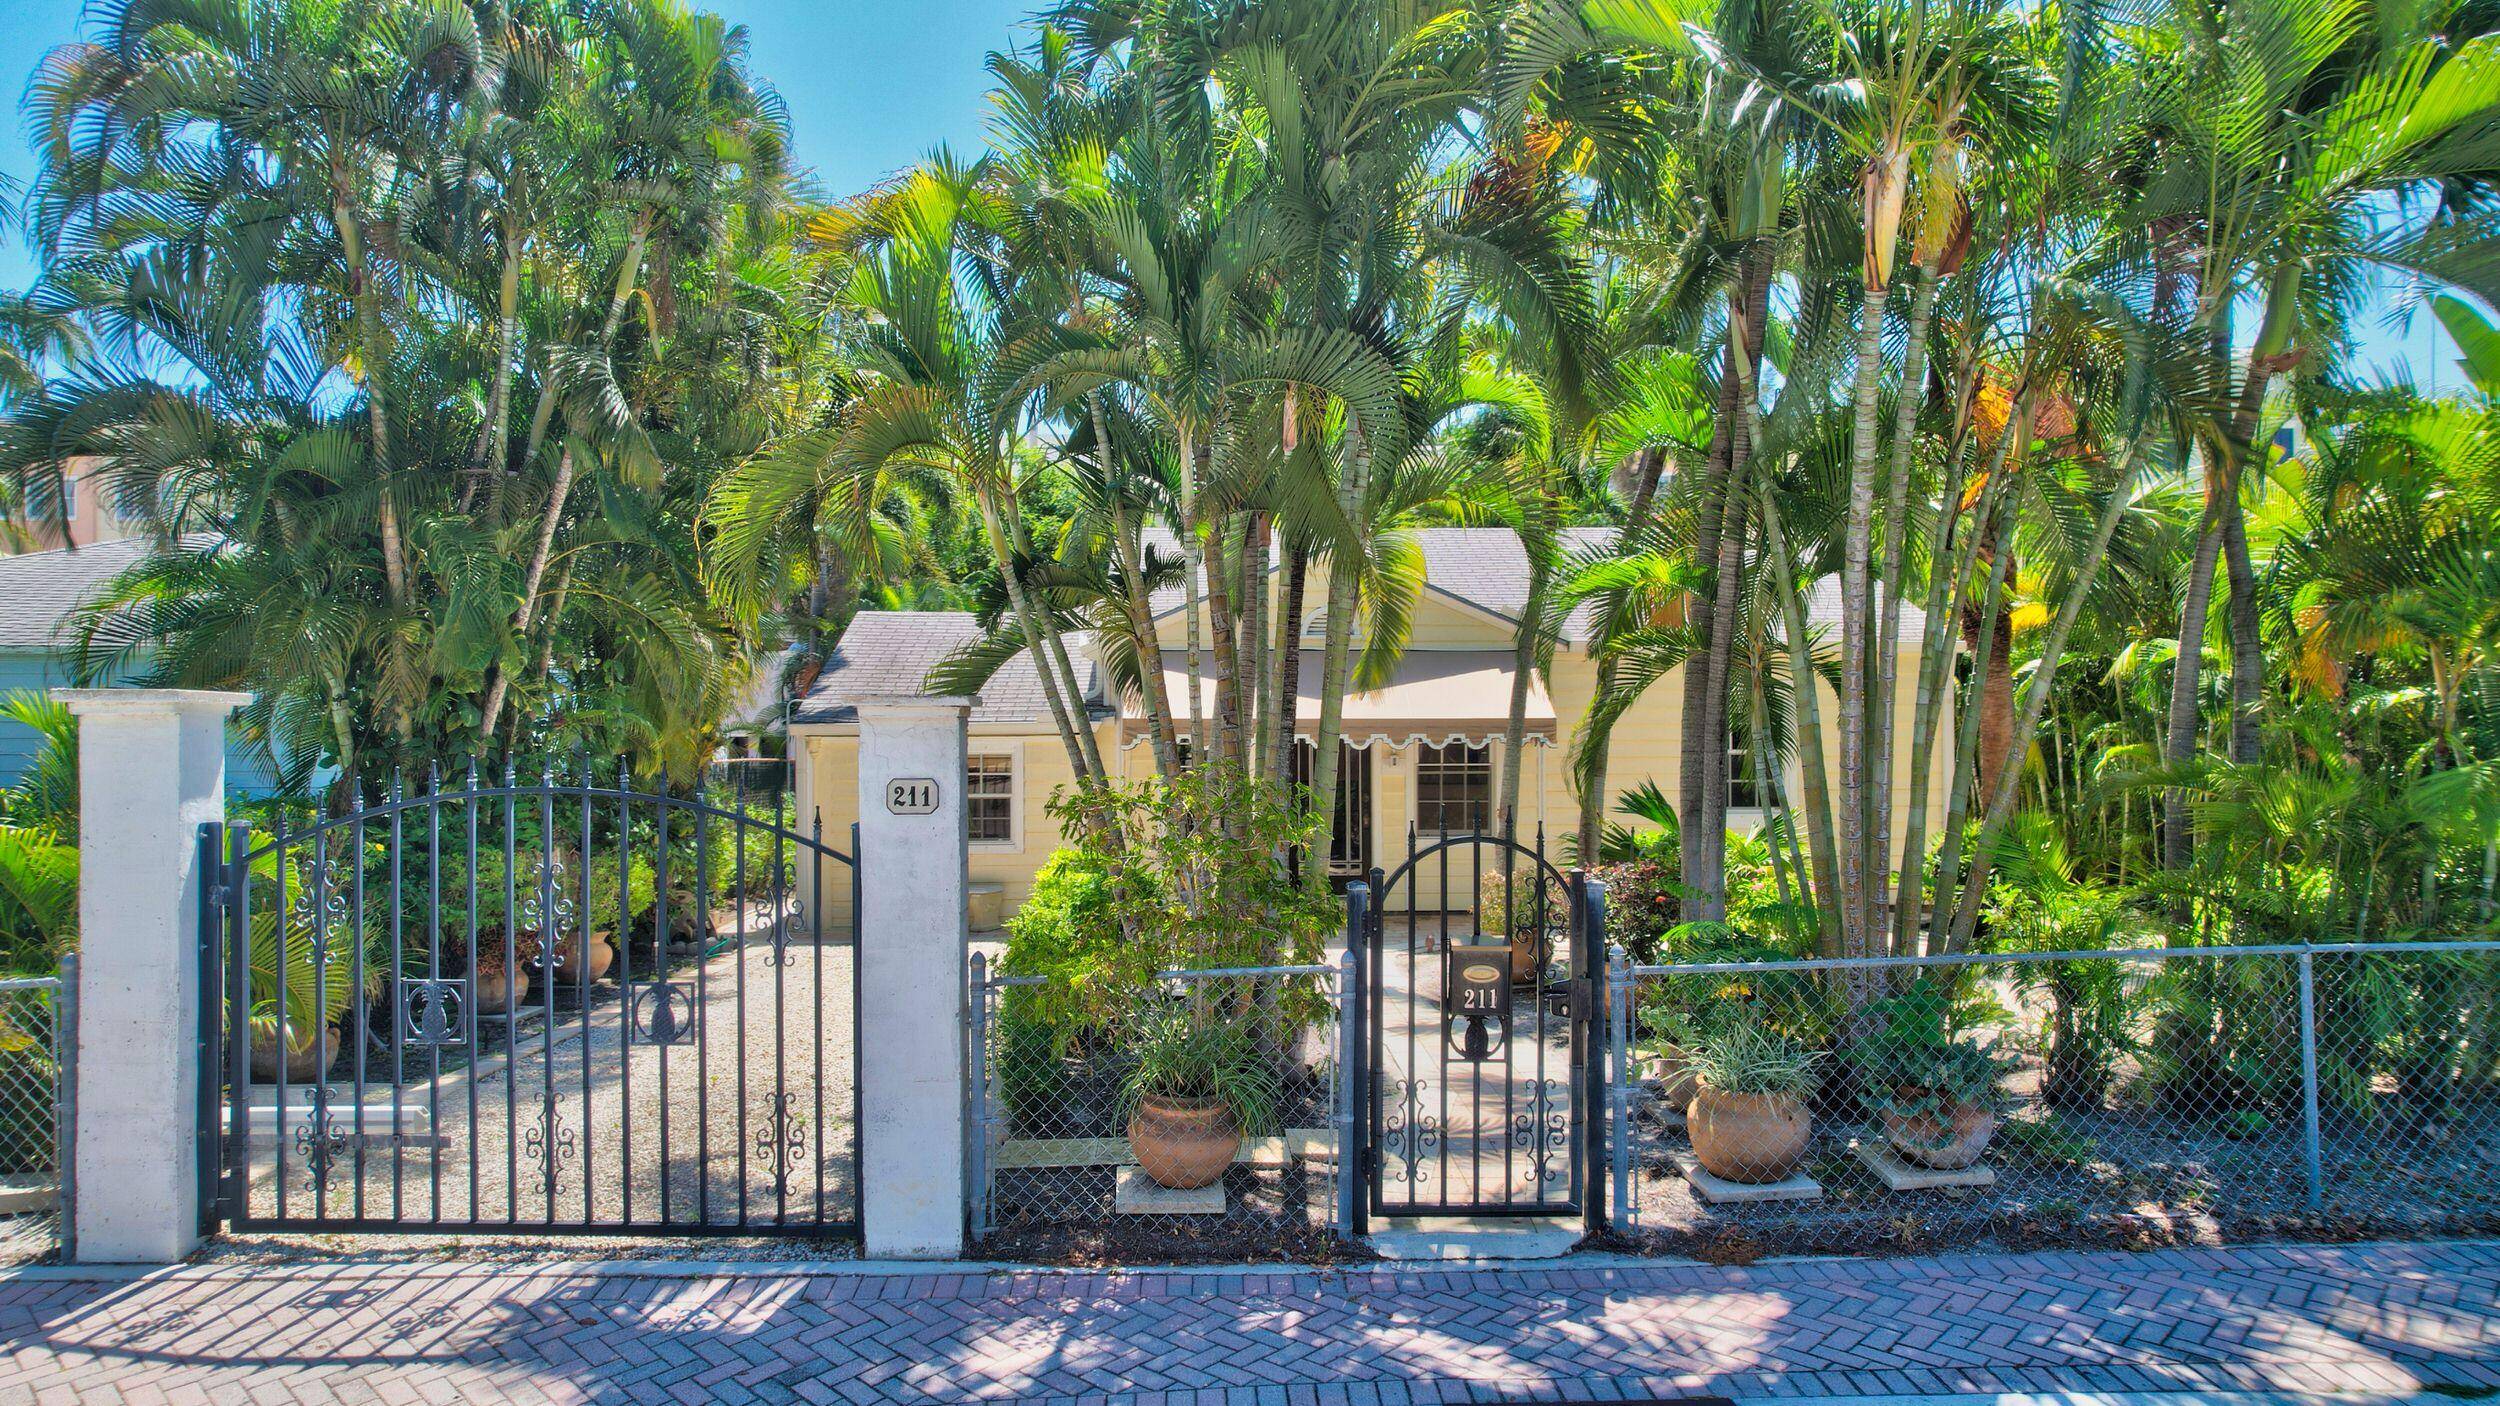 Original historic cottage home and lot in the famous downtown area of Delray Beach.